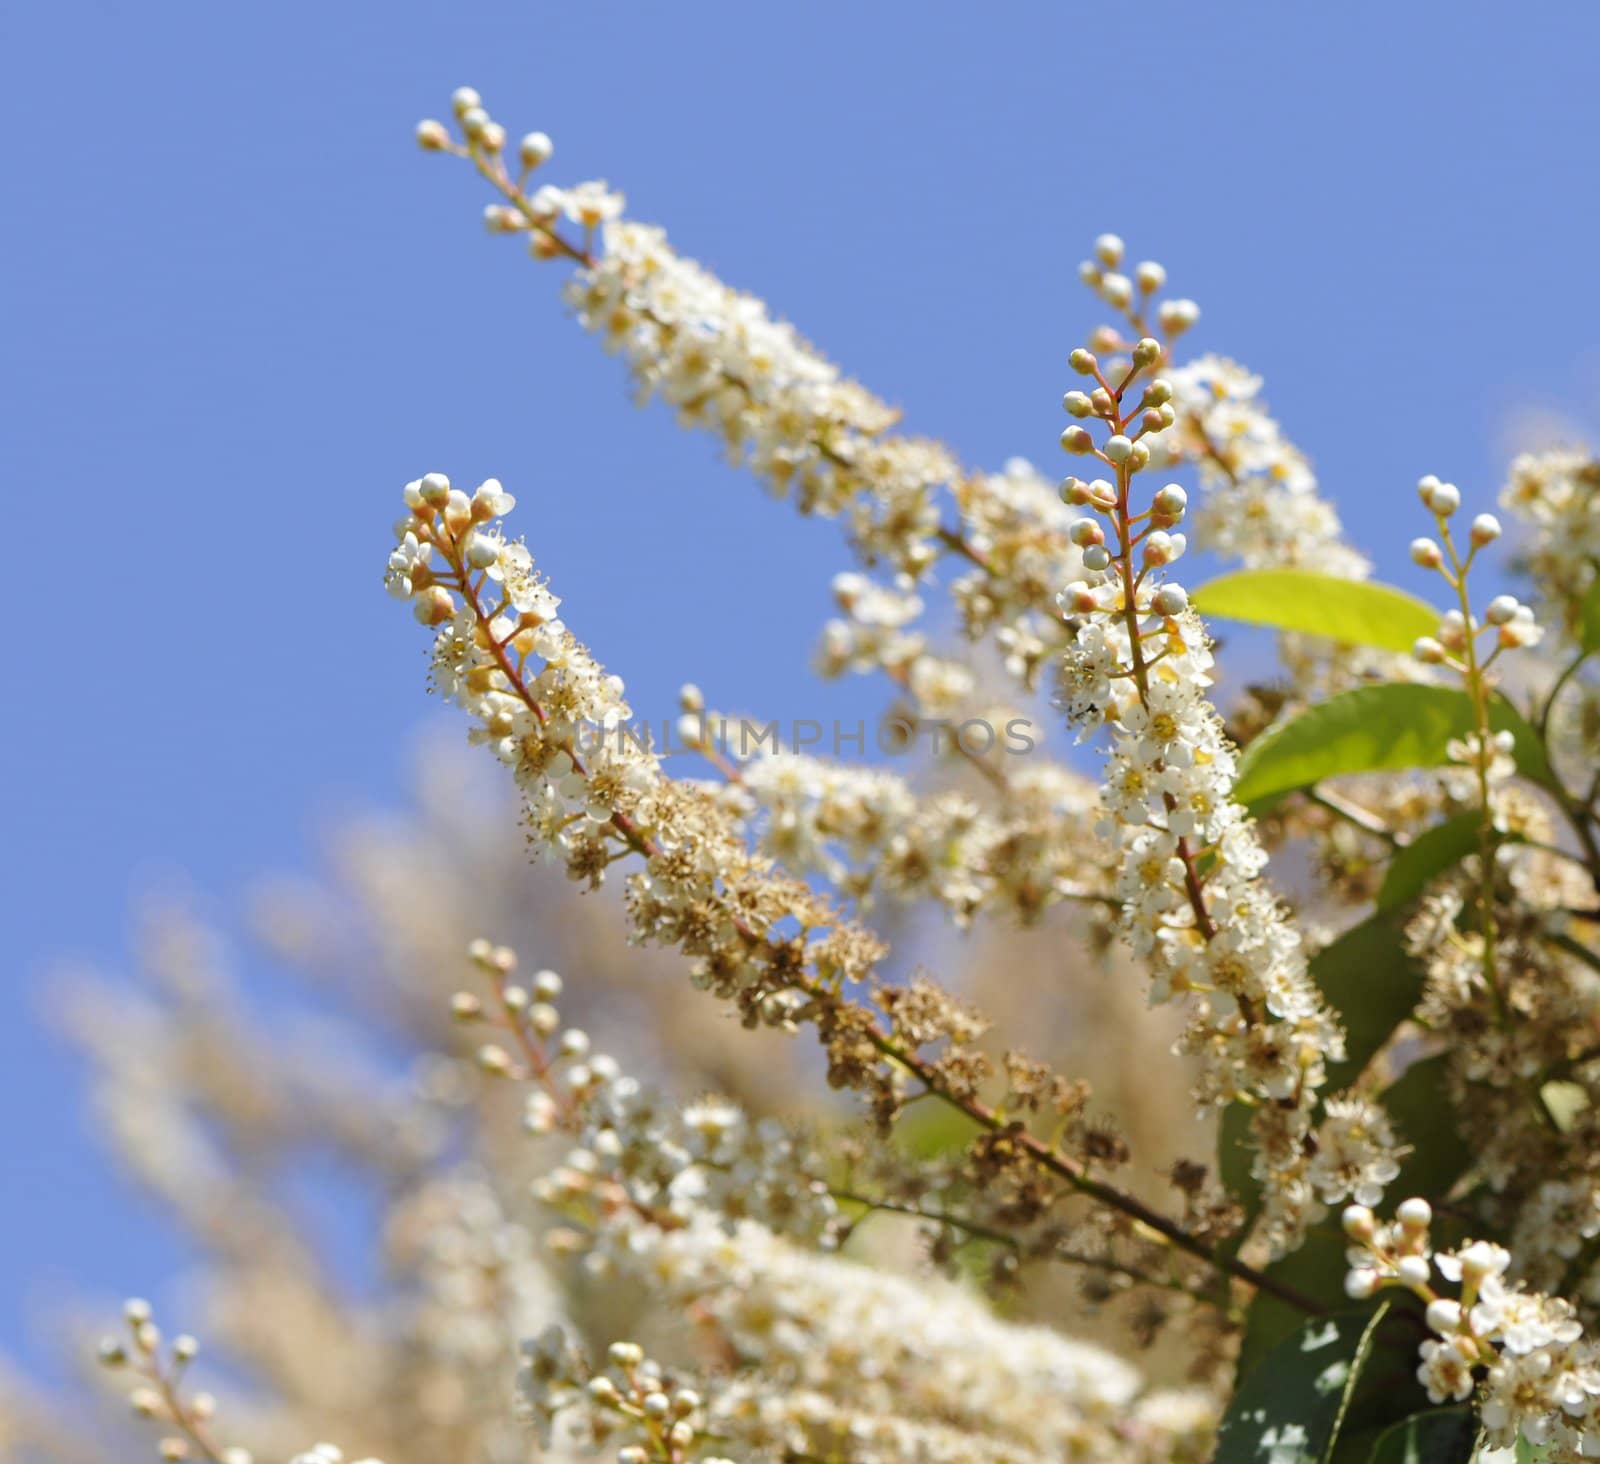 Little white flowers and buds in a bush with a blue sky by shkyo30